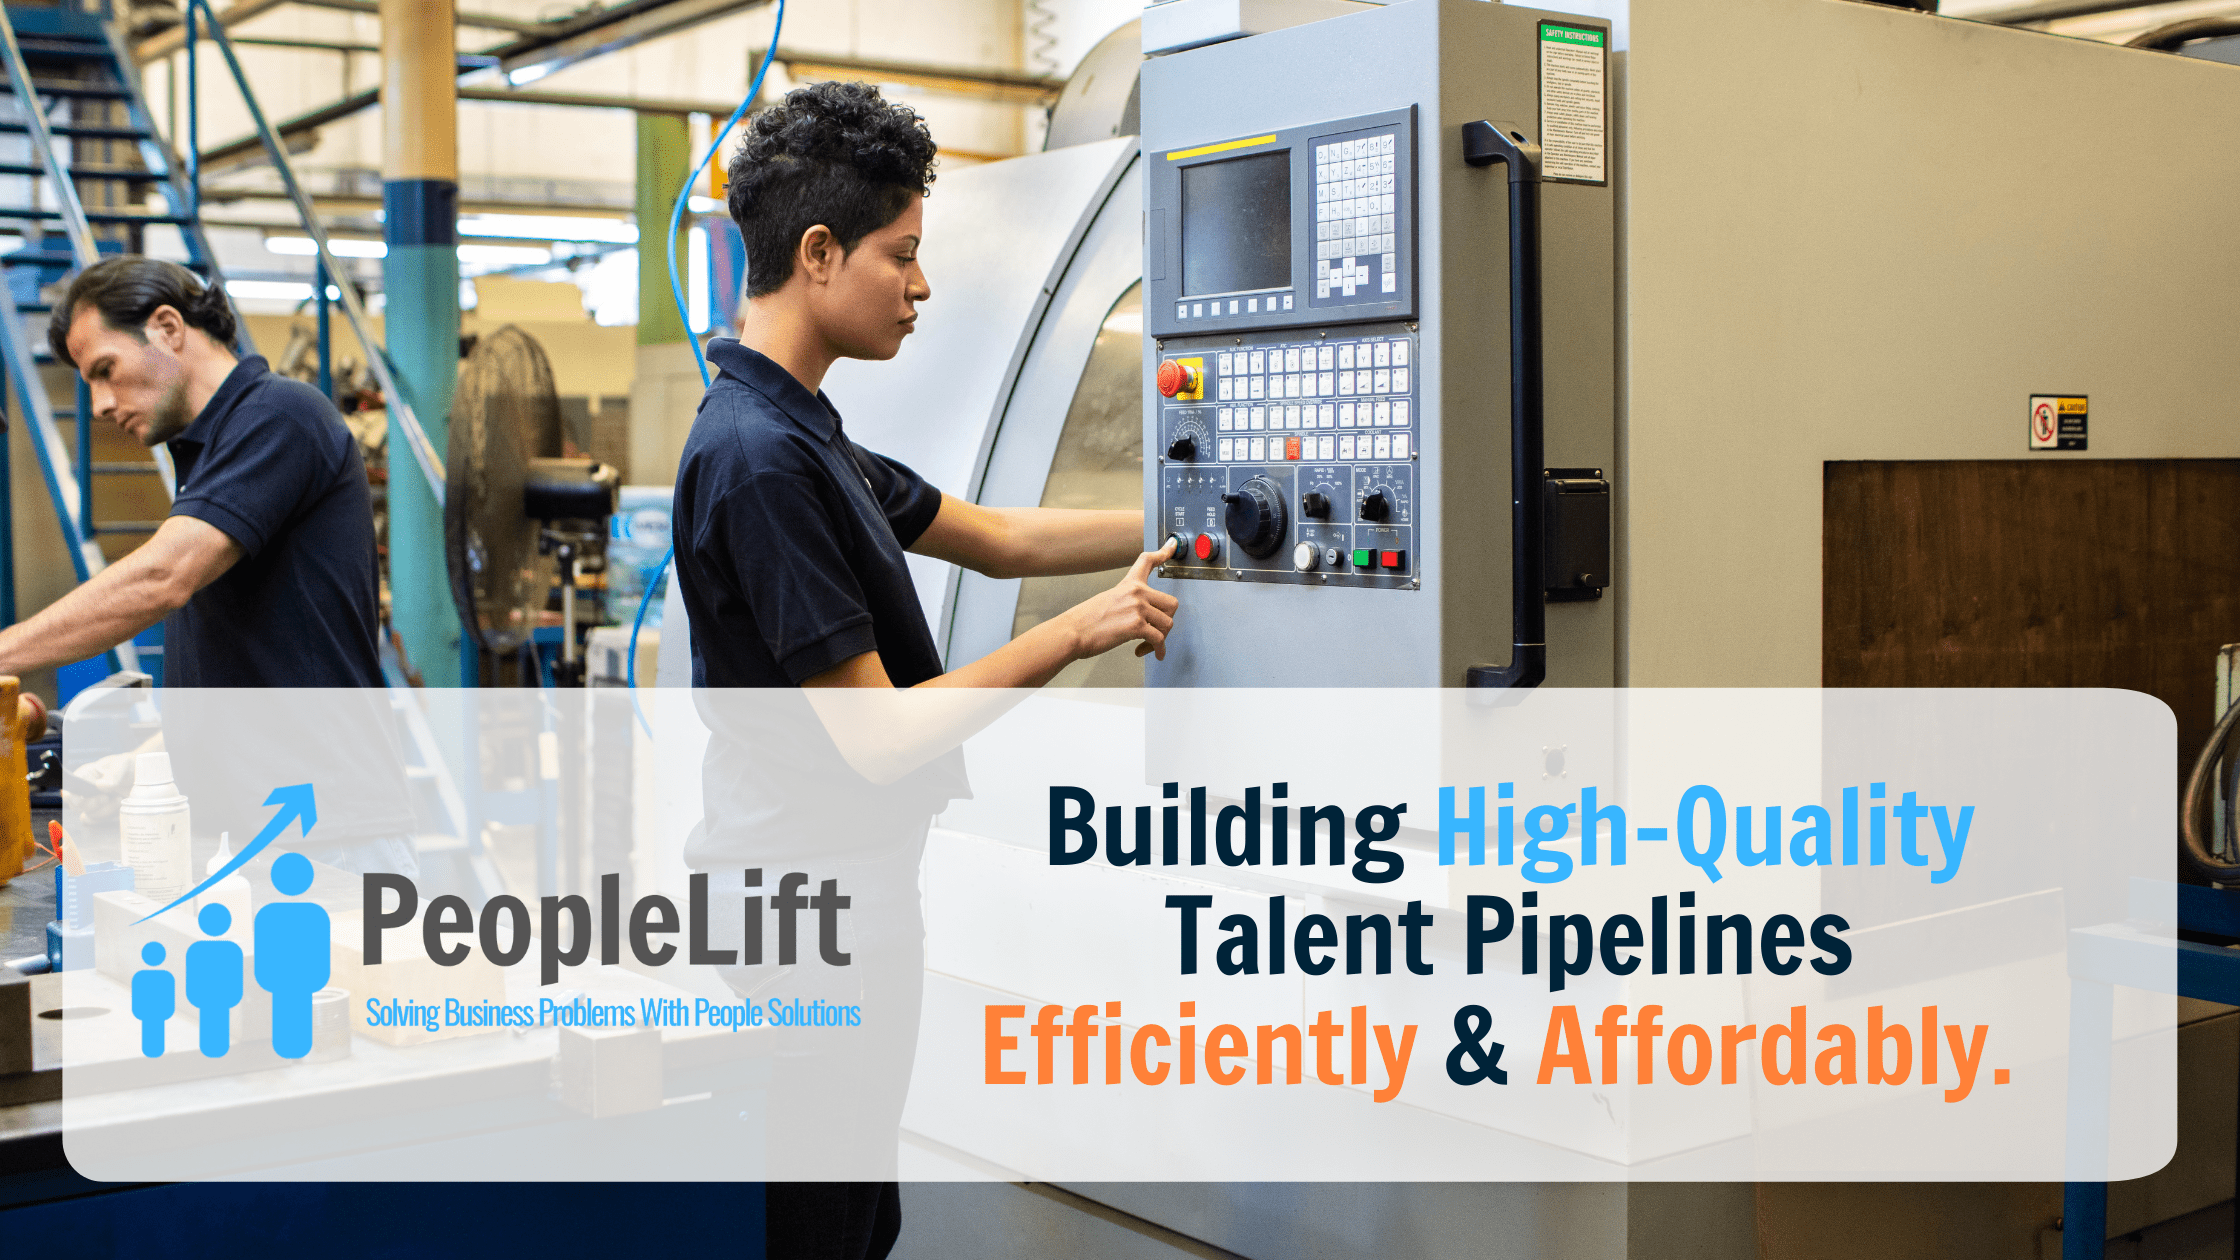 How PeopleLift Used Human Engagement & AI Technology to Fill a High-Quality Pipeline Efficiently and Affordably